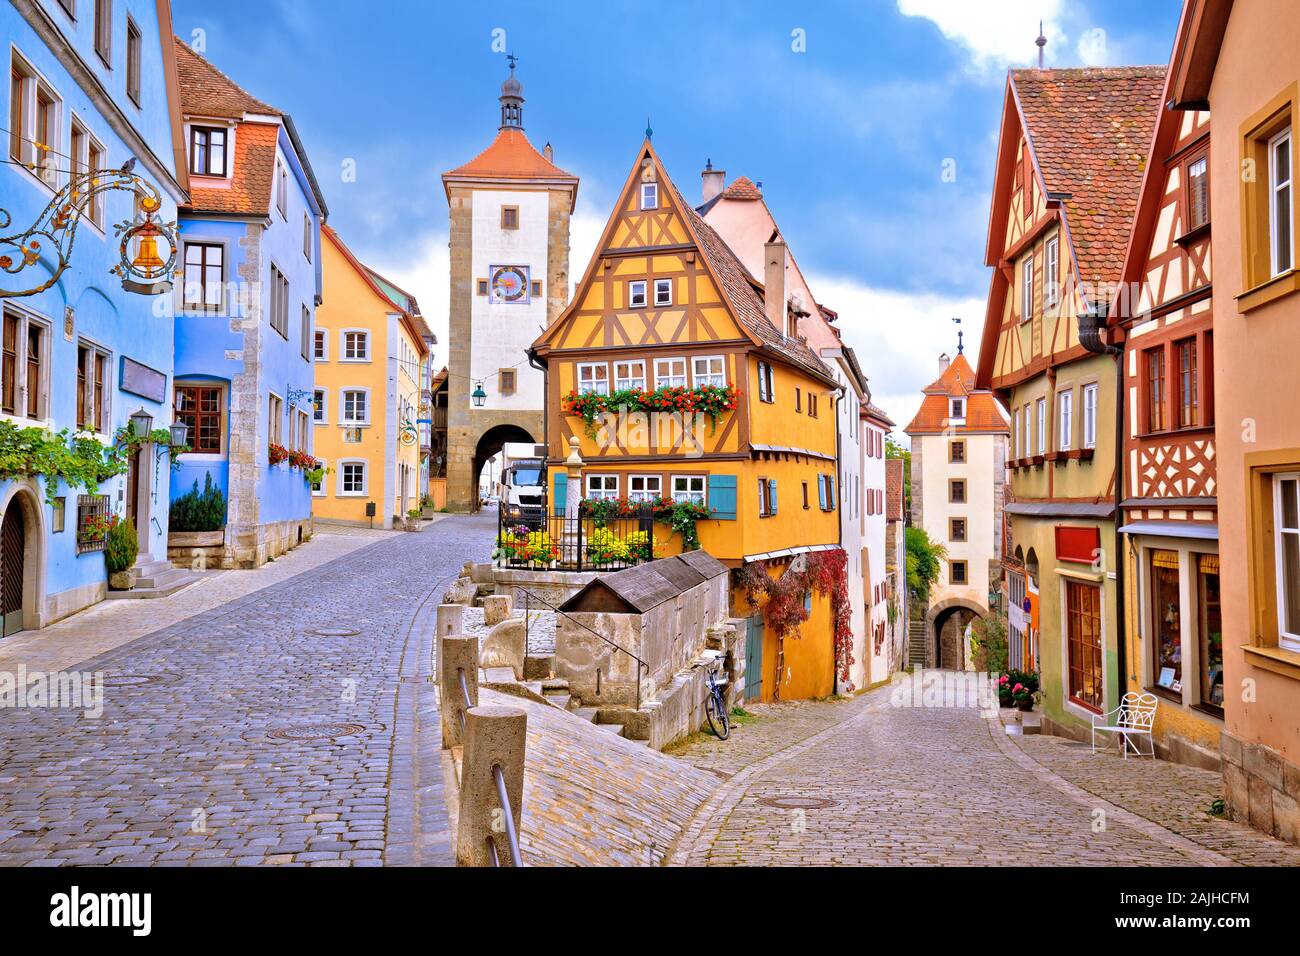 Cobbled street and architecture of historic town of Rothenburg ob der Tauber view, Romantic road of Bavaria region of Germany Stock Photo